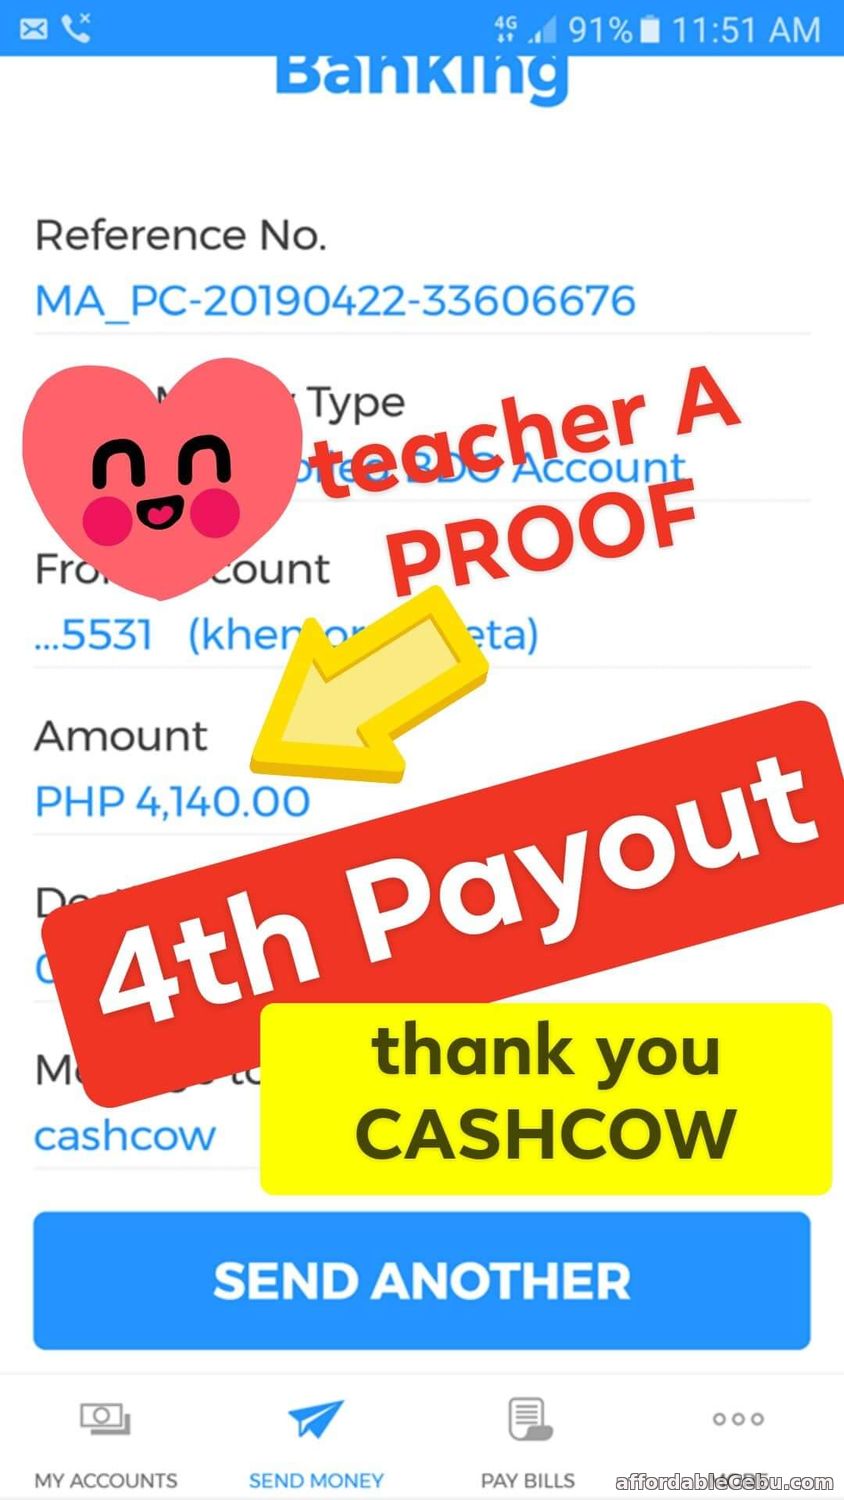 CashCowRobot Proof of Income